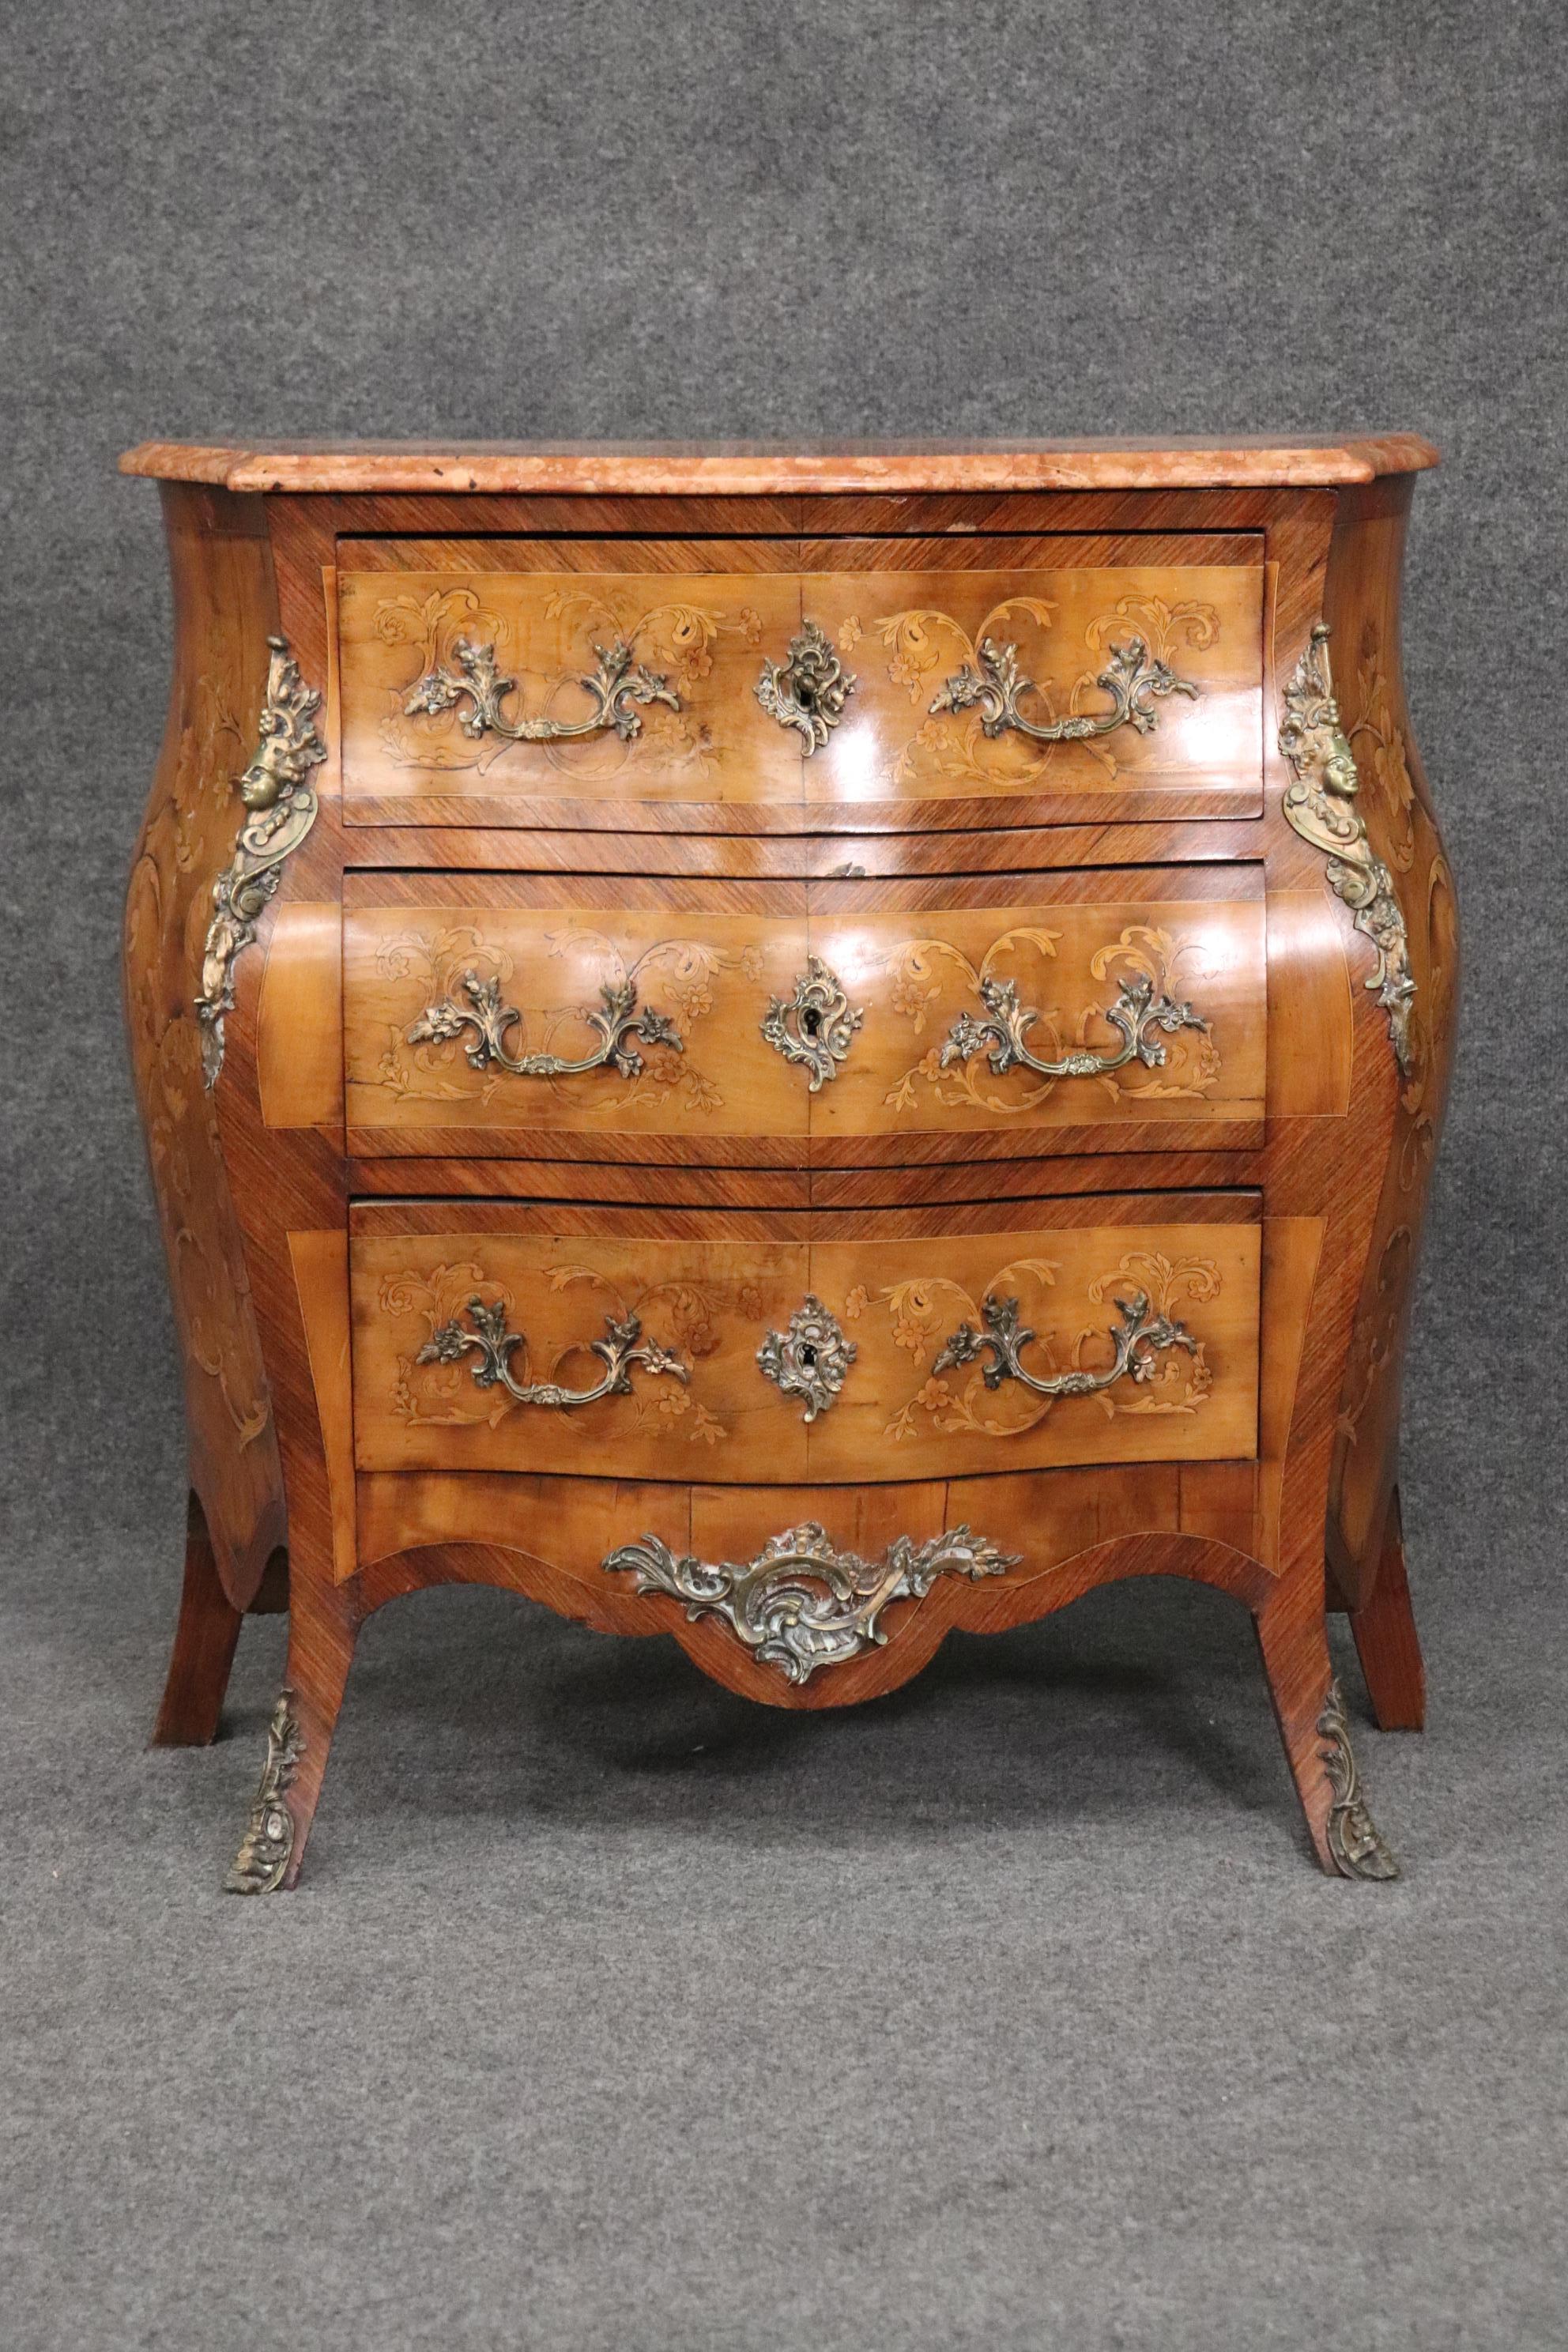 Inlaid Figural Bronze Mounted Burled Walnut French Louis XV Marble Top Commode In Good Condition For Sale In Swedesboro, NJ